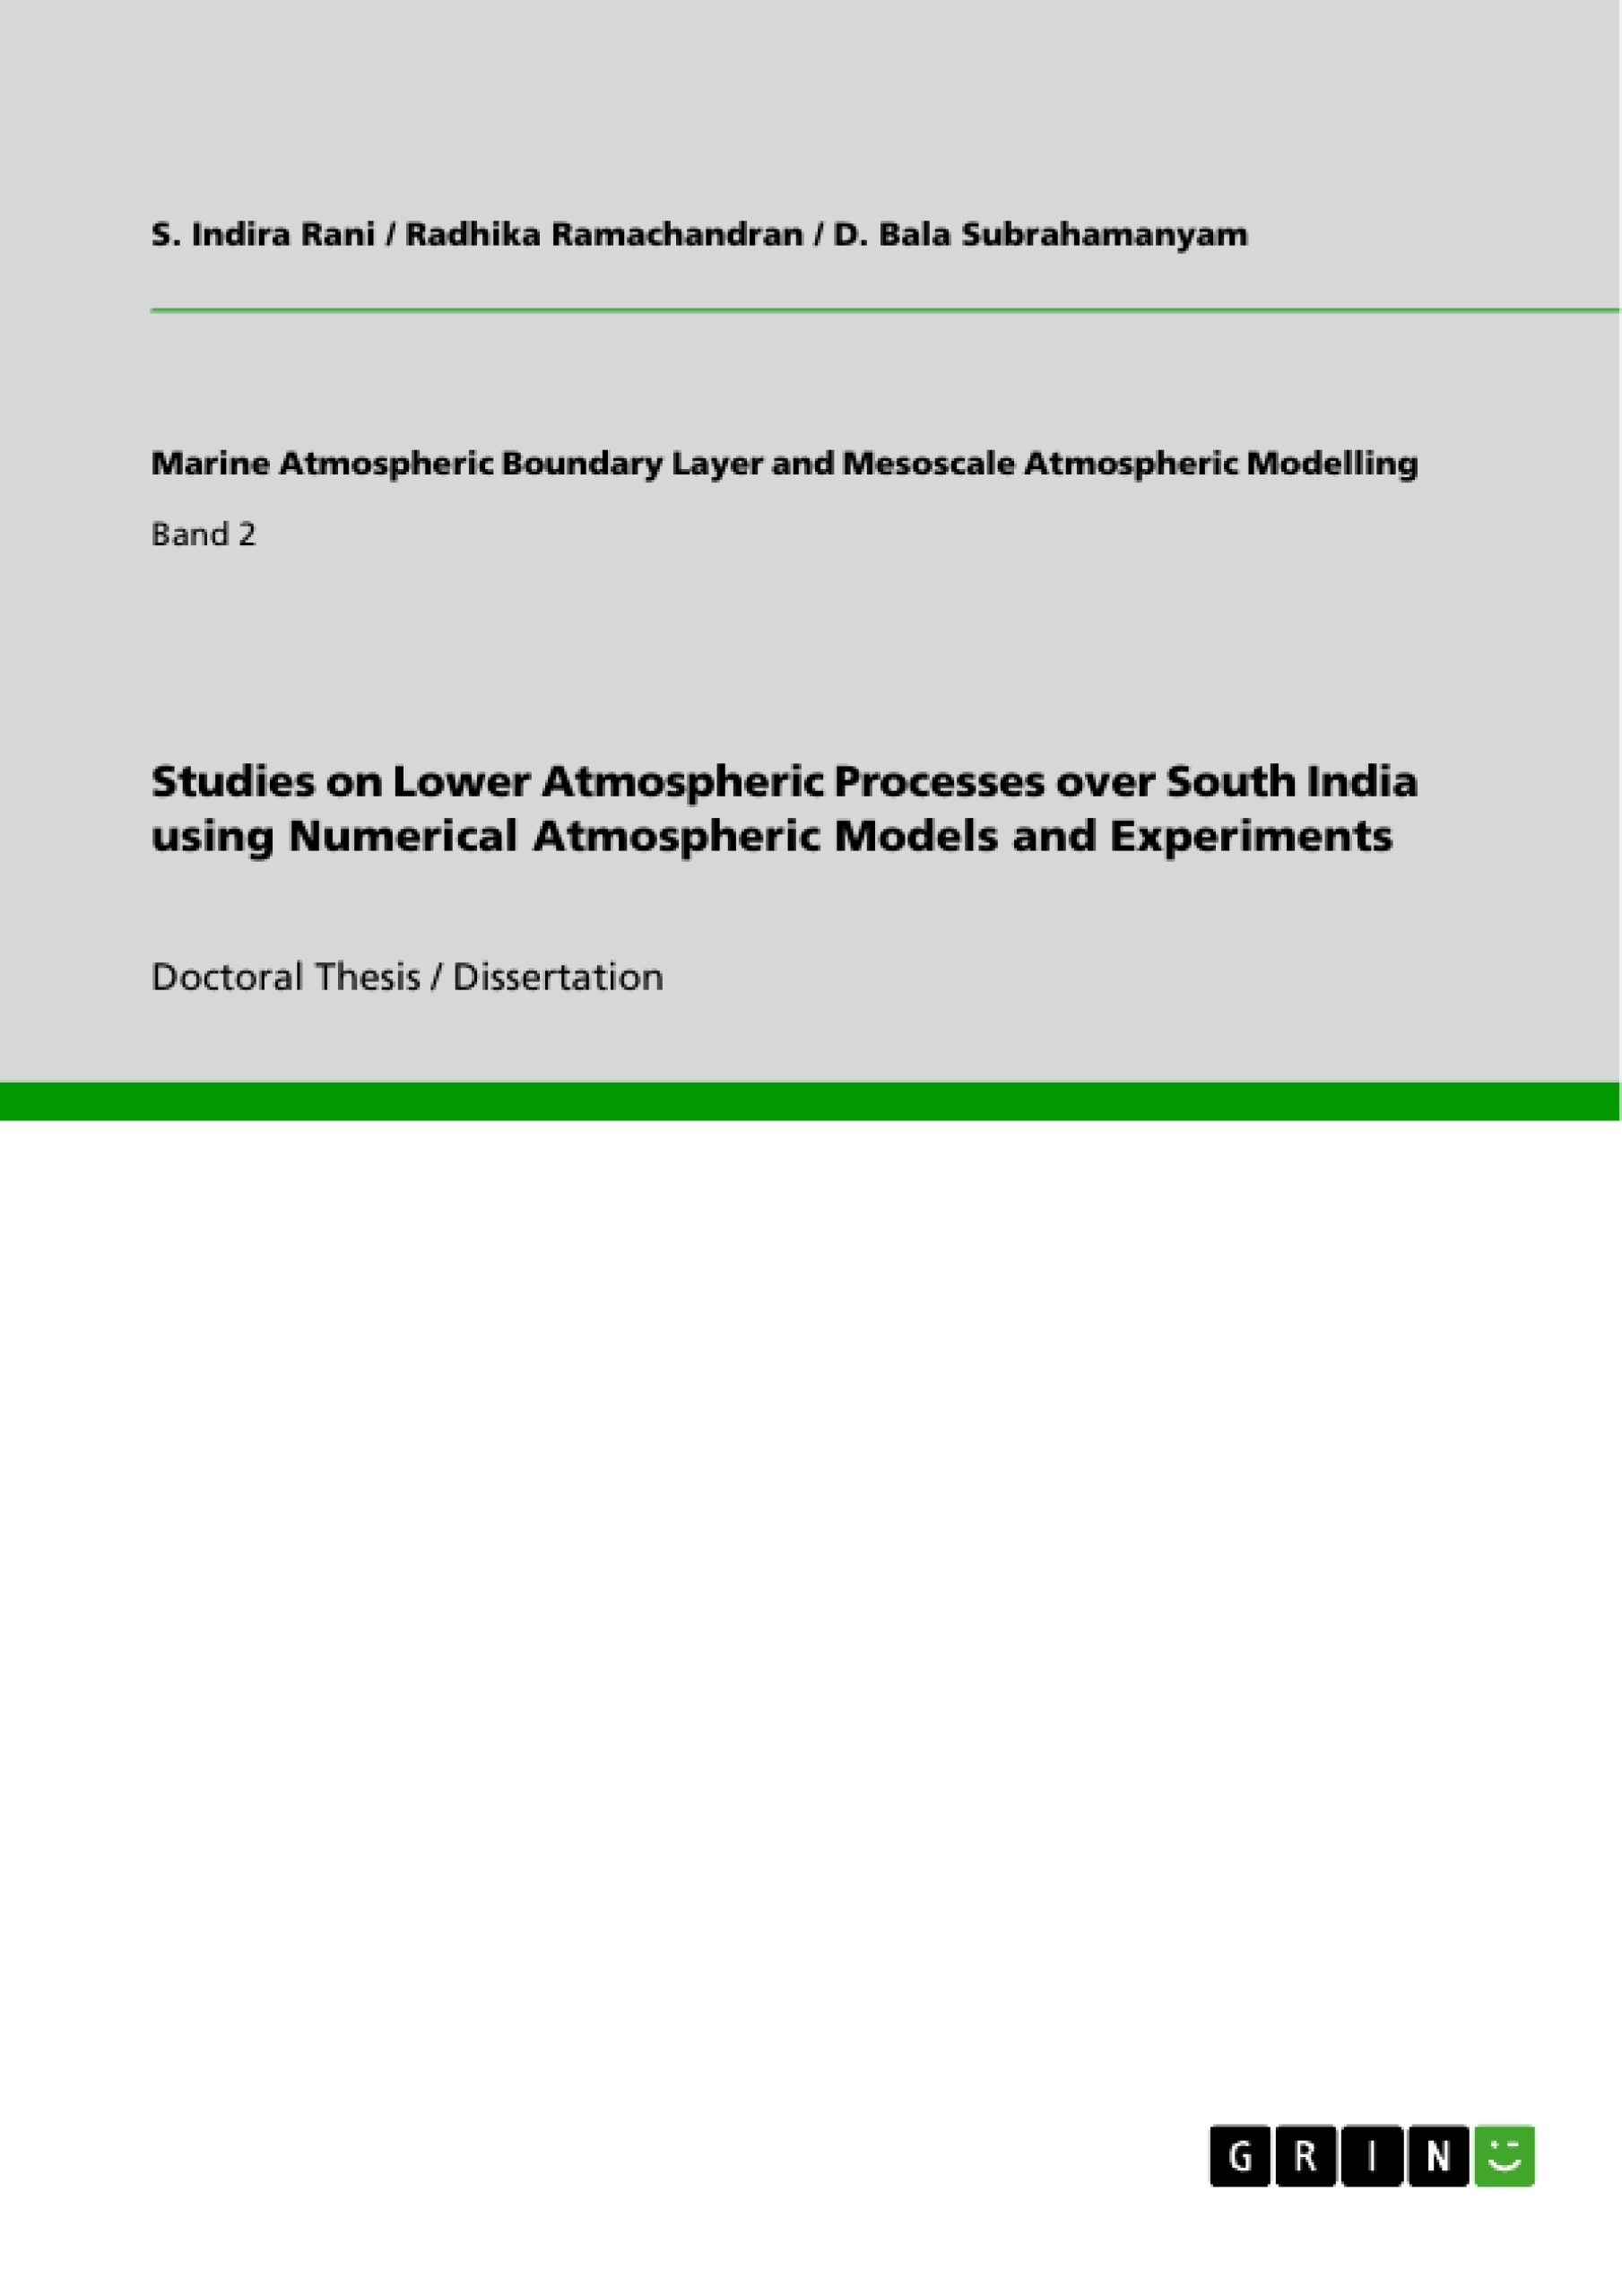 Title: Studies on Lower Atmospheric Processes over South India using Numerical Atmospheric Models and Experiments